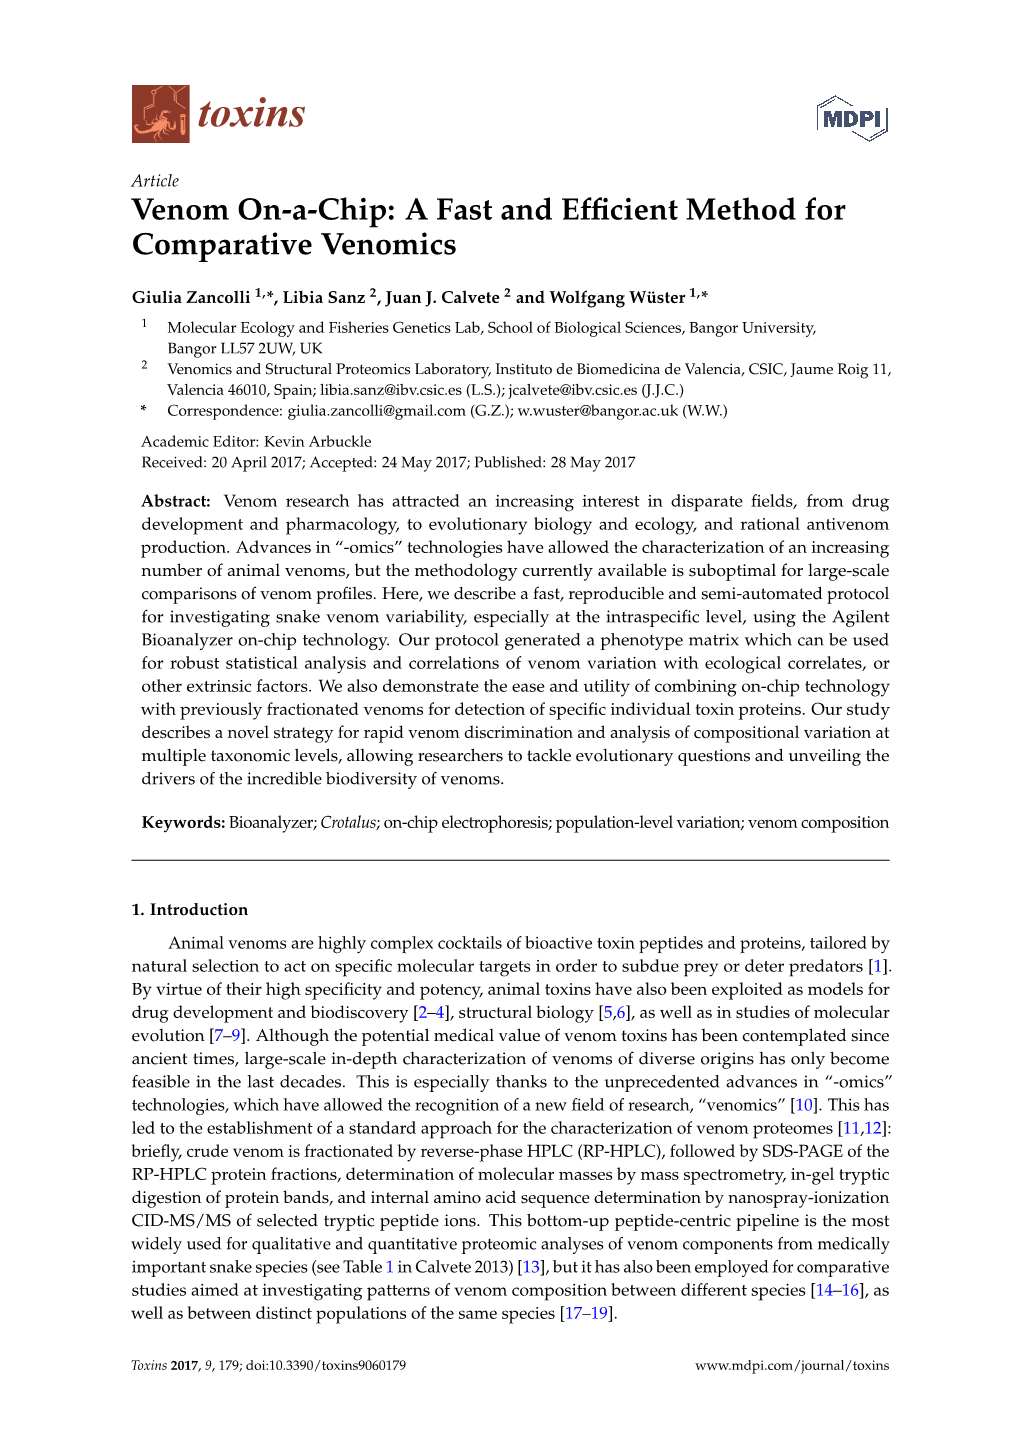 Venom On-A-Chip: a Fast and Efficient Method for Comparative Venomics